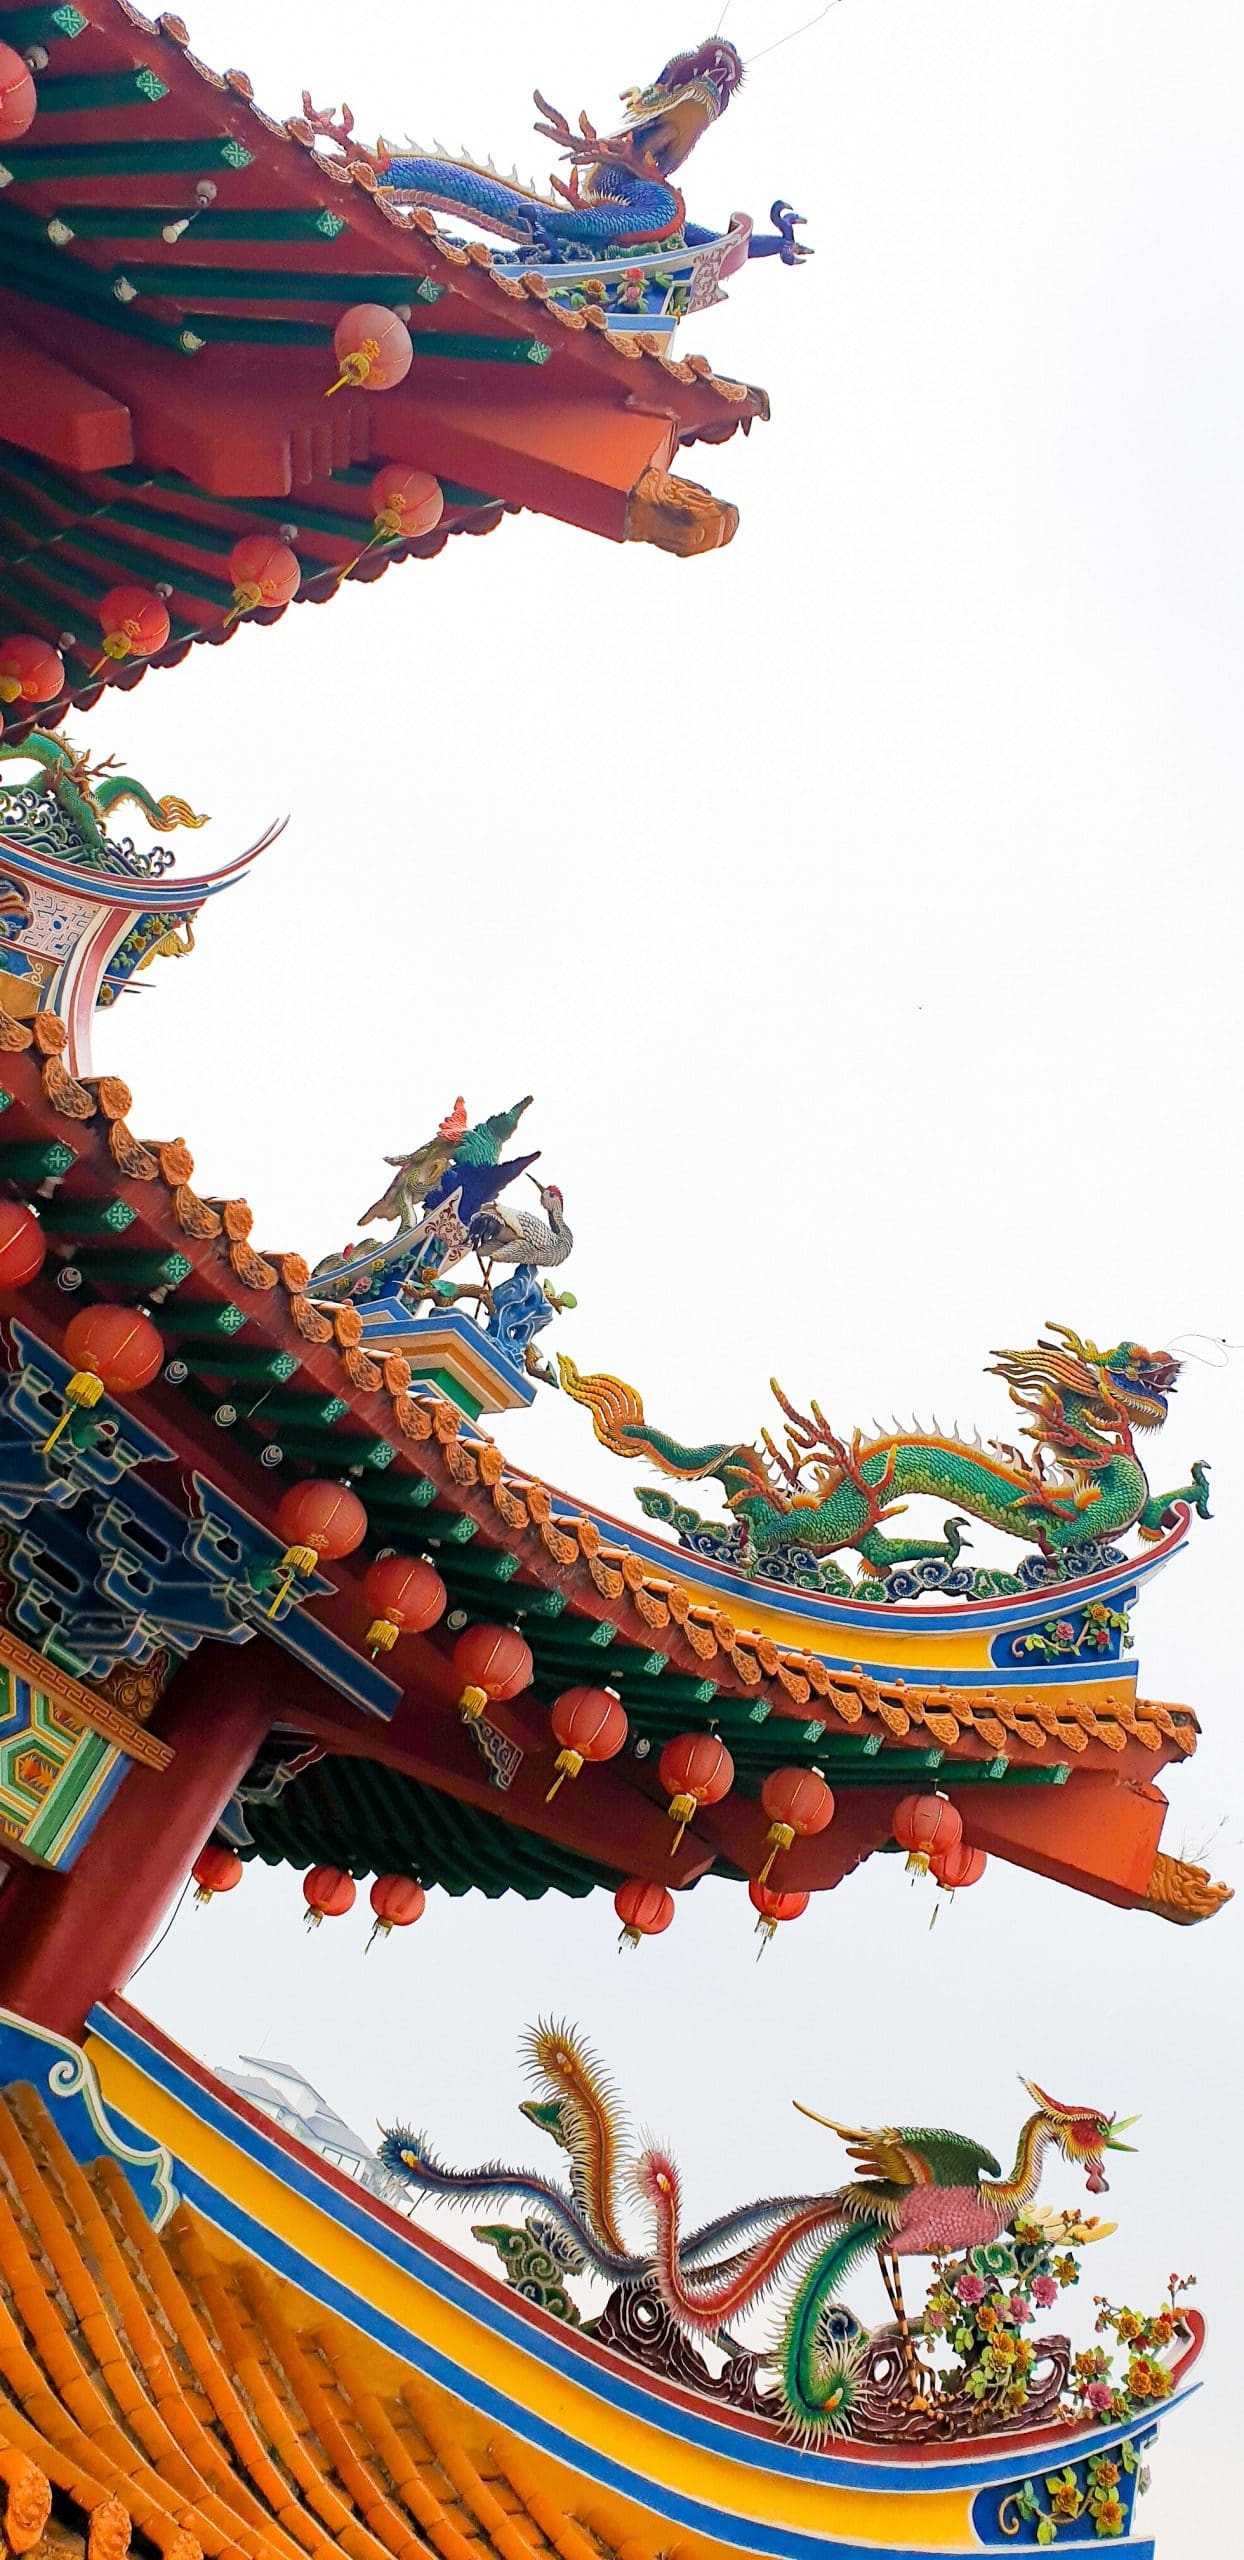 Dragons and birds adorn the roof of the temple